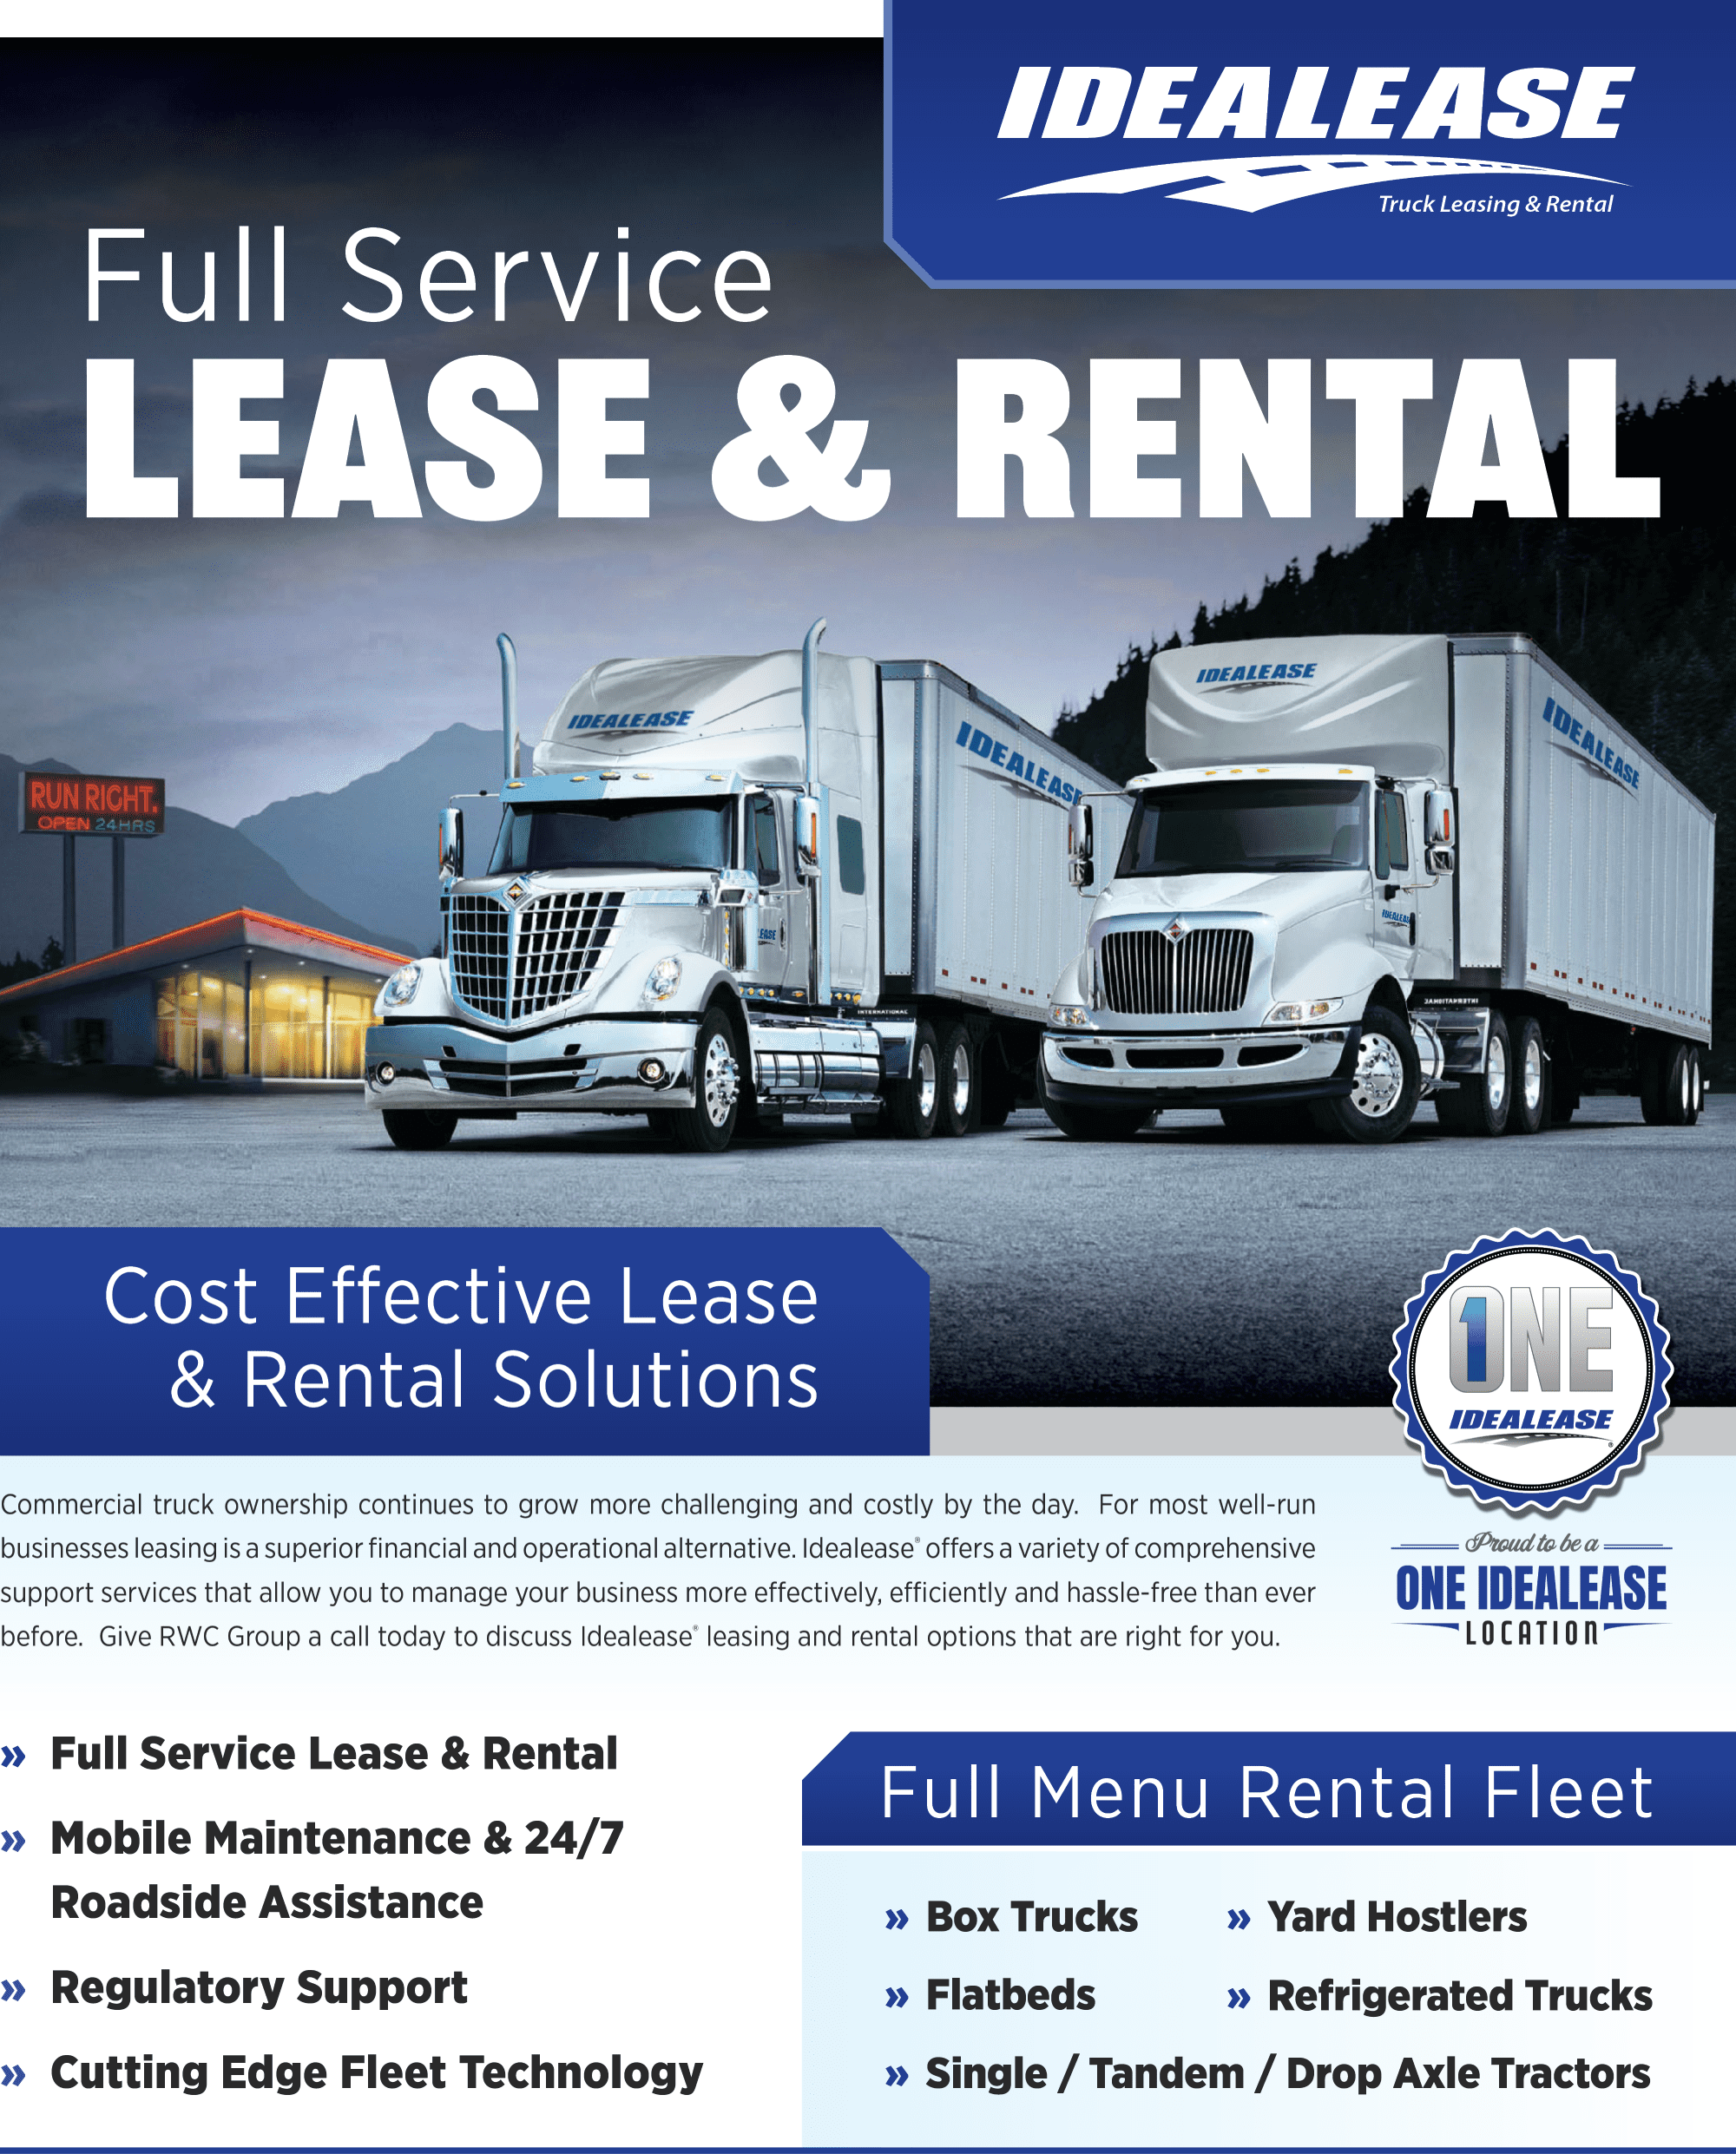 Idealease Full Service Lease and Rental Banner